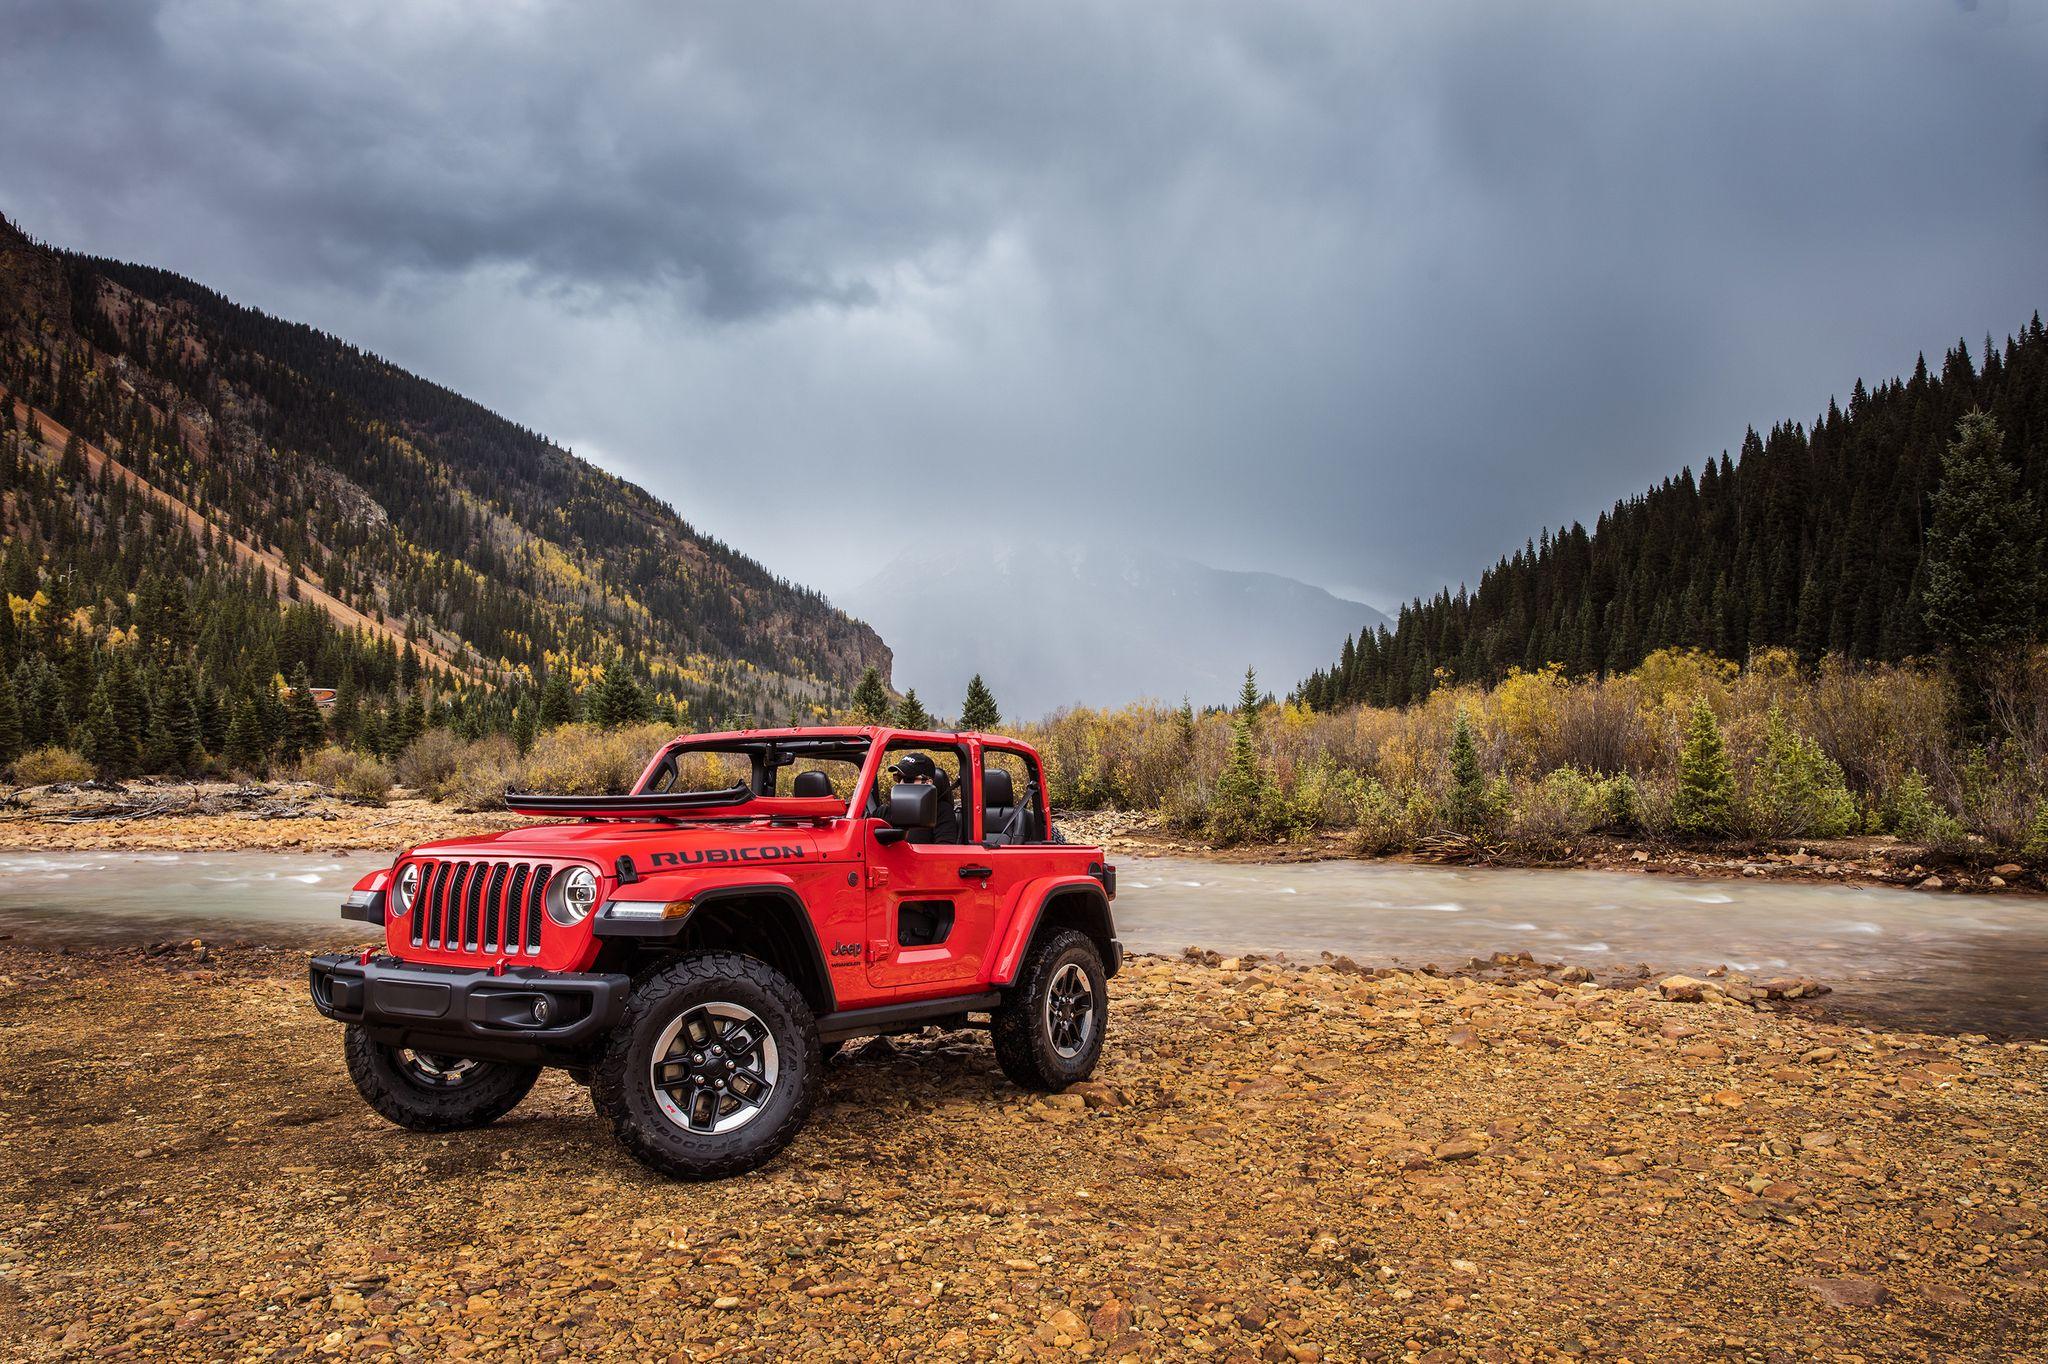 Jeep Wrangler Re Road Test Price For The Jl